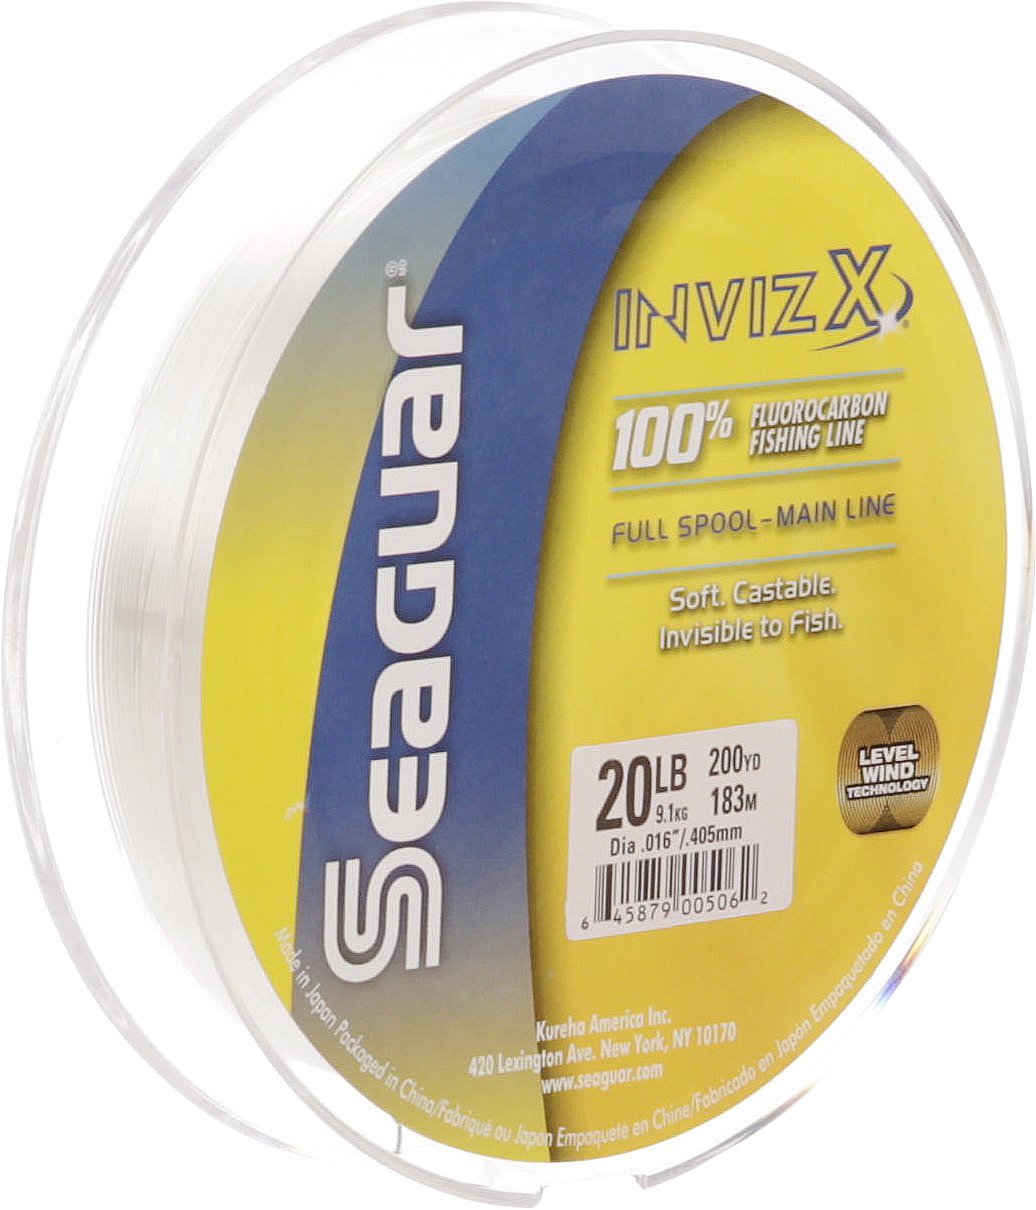 Seaguar Athletic Grade Imported Fluorocarbon Line Isoyu Sea Fishing Luya  Fishing Line Front Lead Special